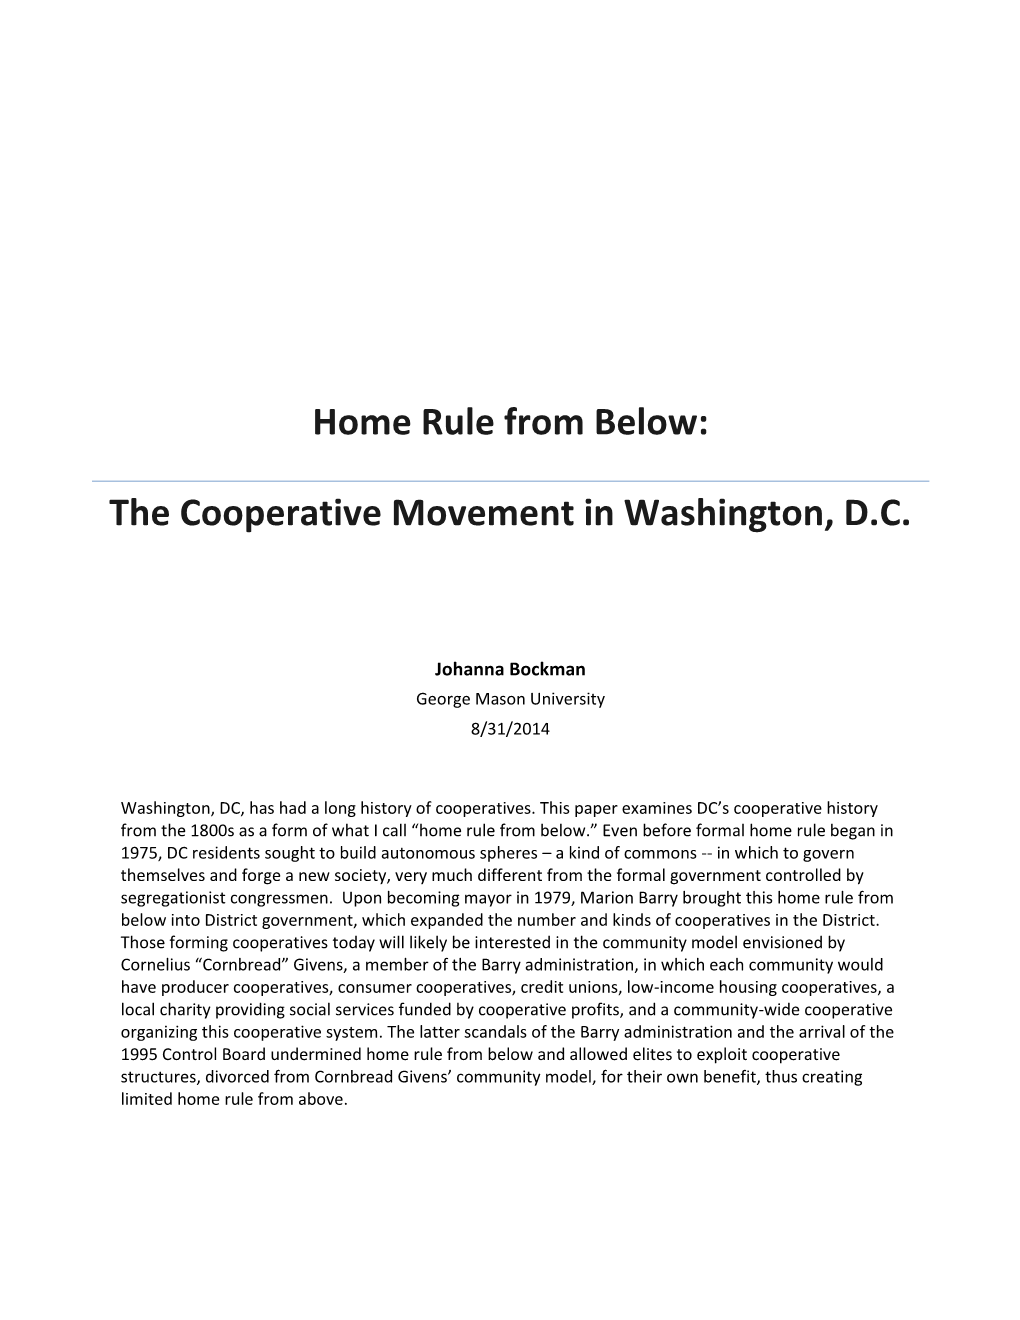 The Cooperative Movement in Washington, DC